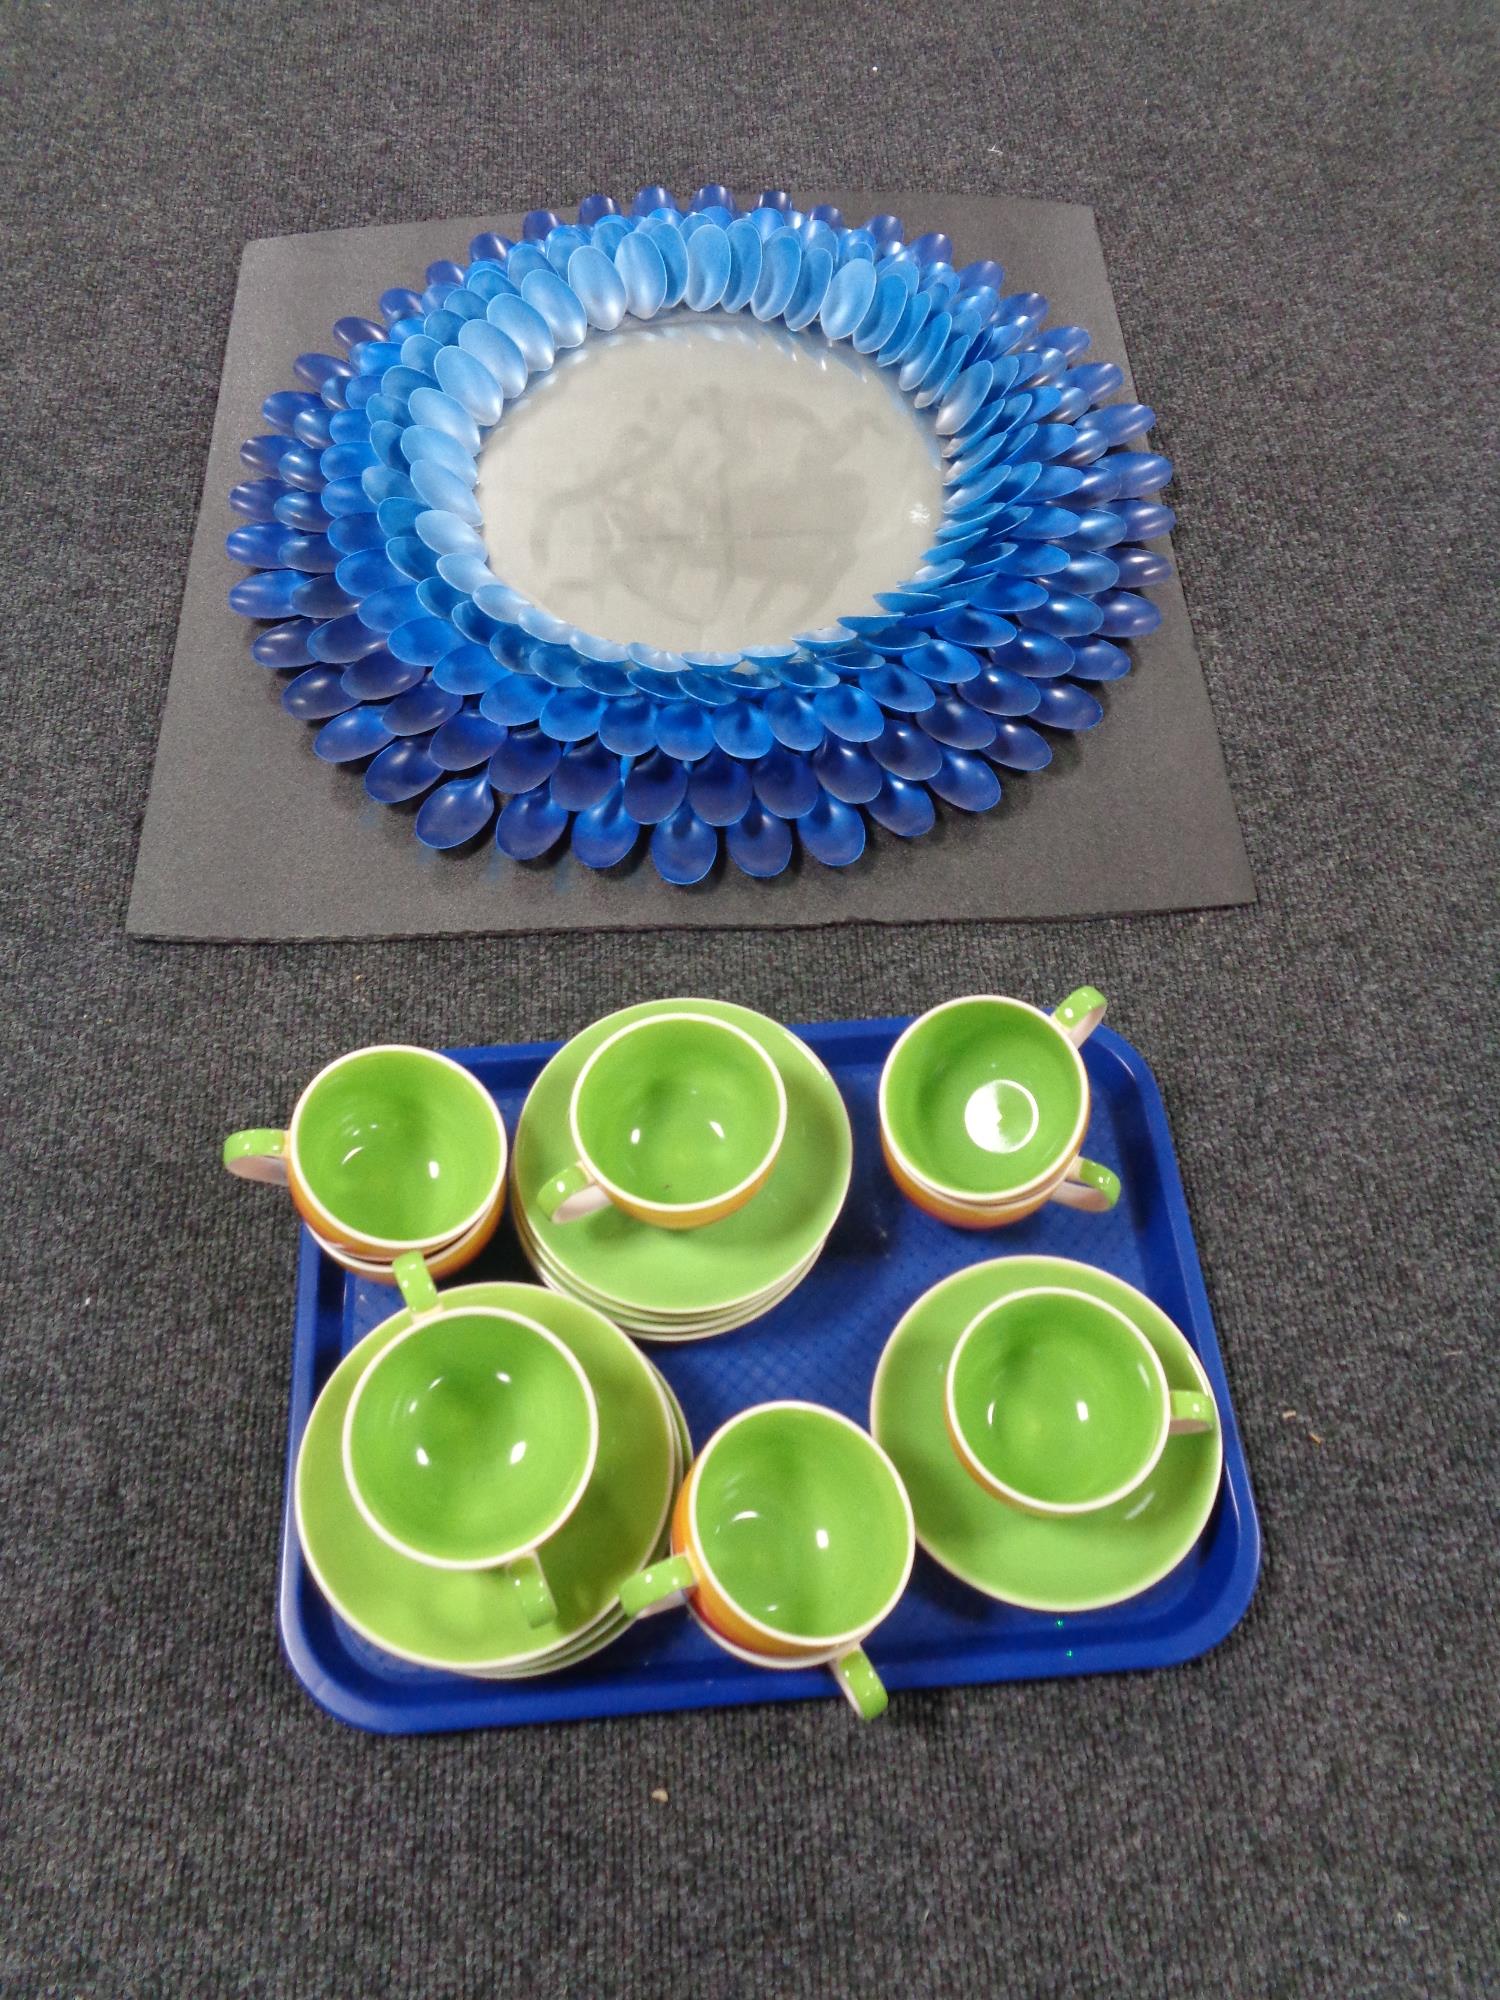 A circular contemporary mirror together with a tray containing Jones teacups and saucers